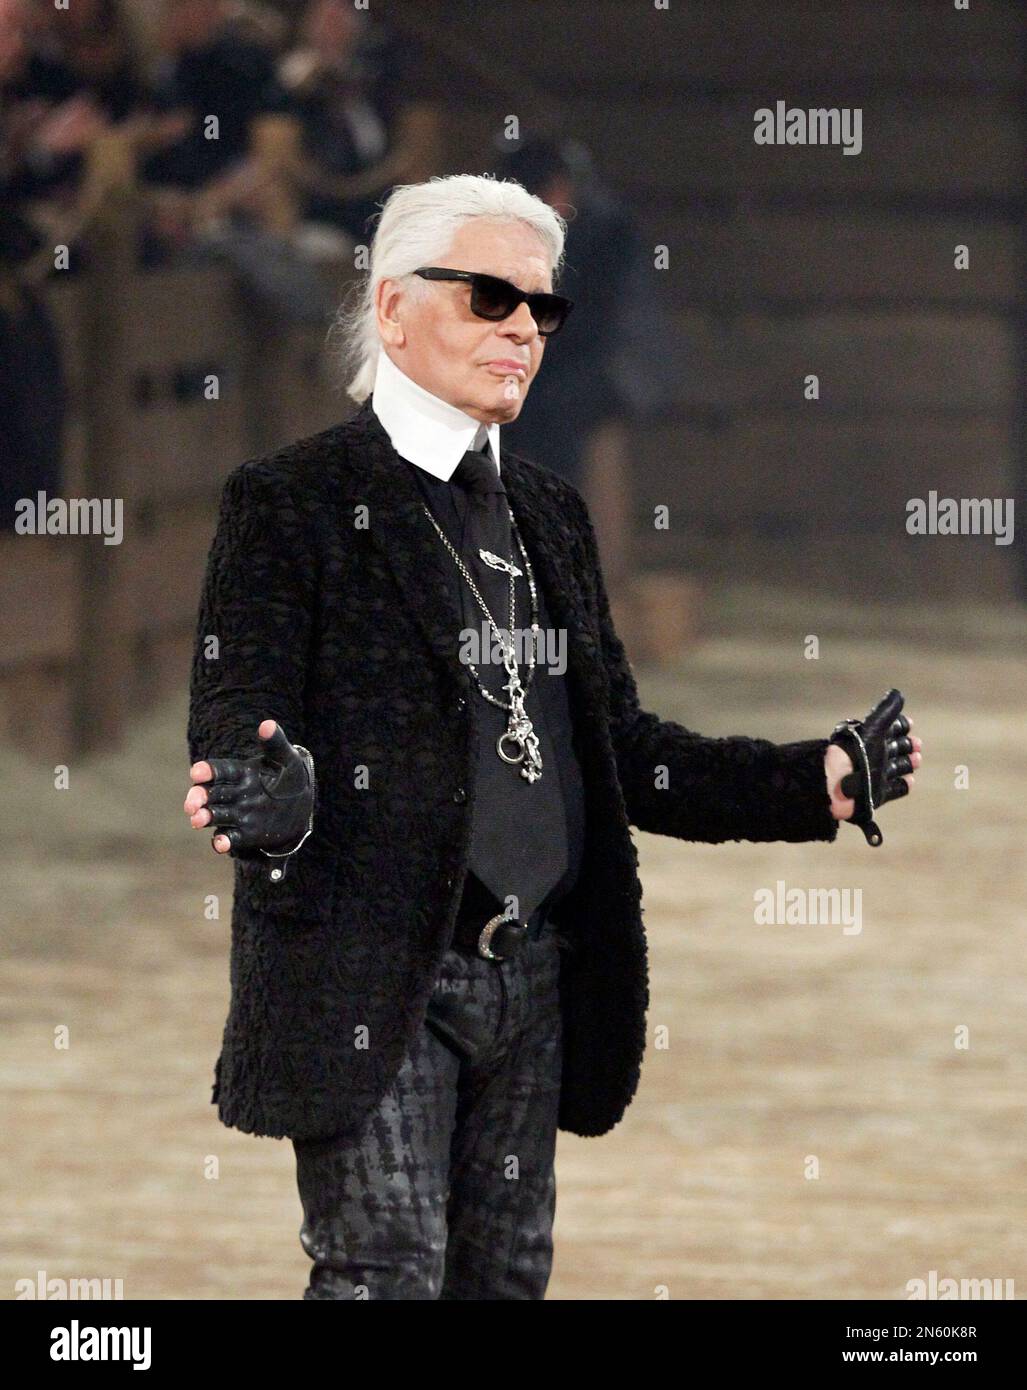 Chanel designer Karl Lagerfeld takes a bow at the end of his